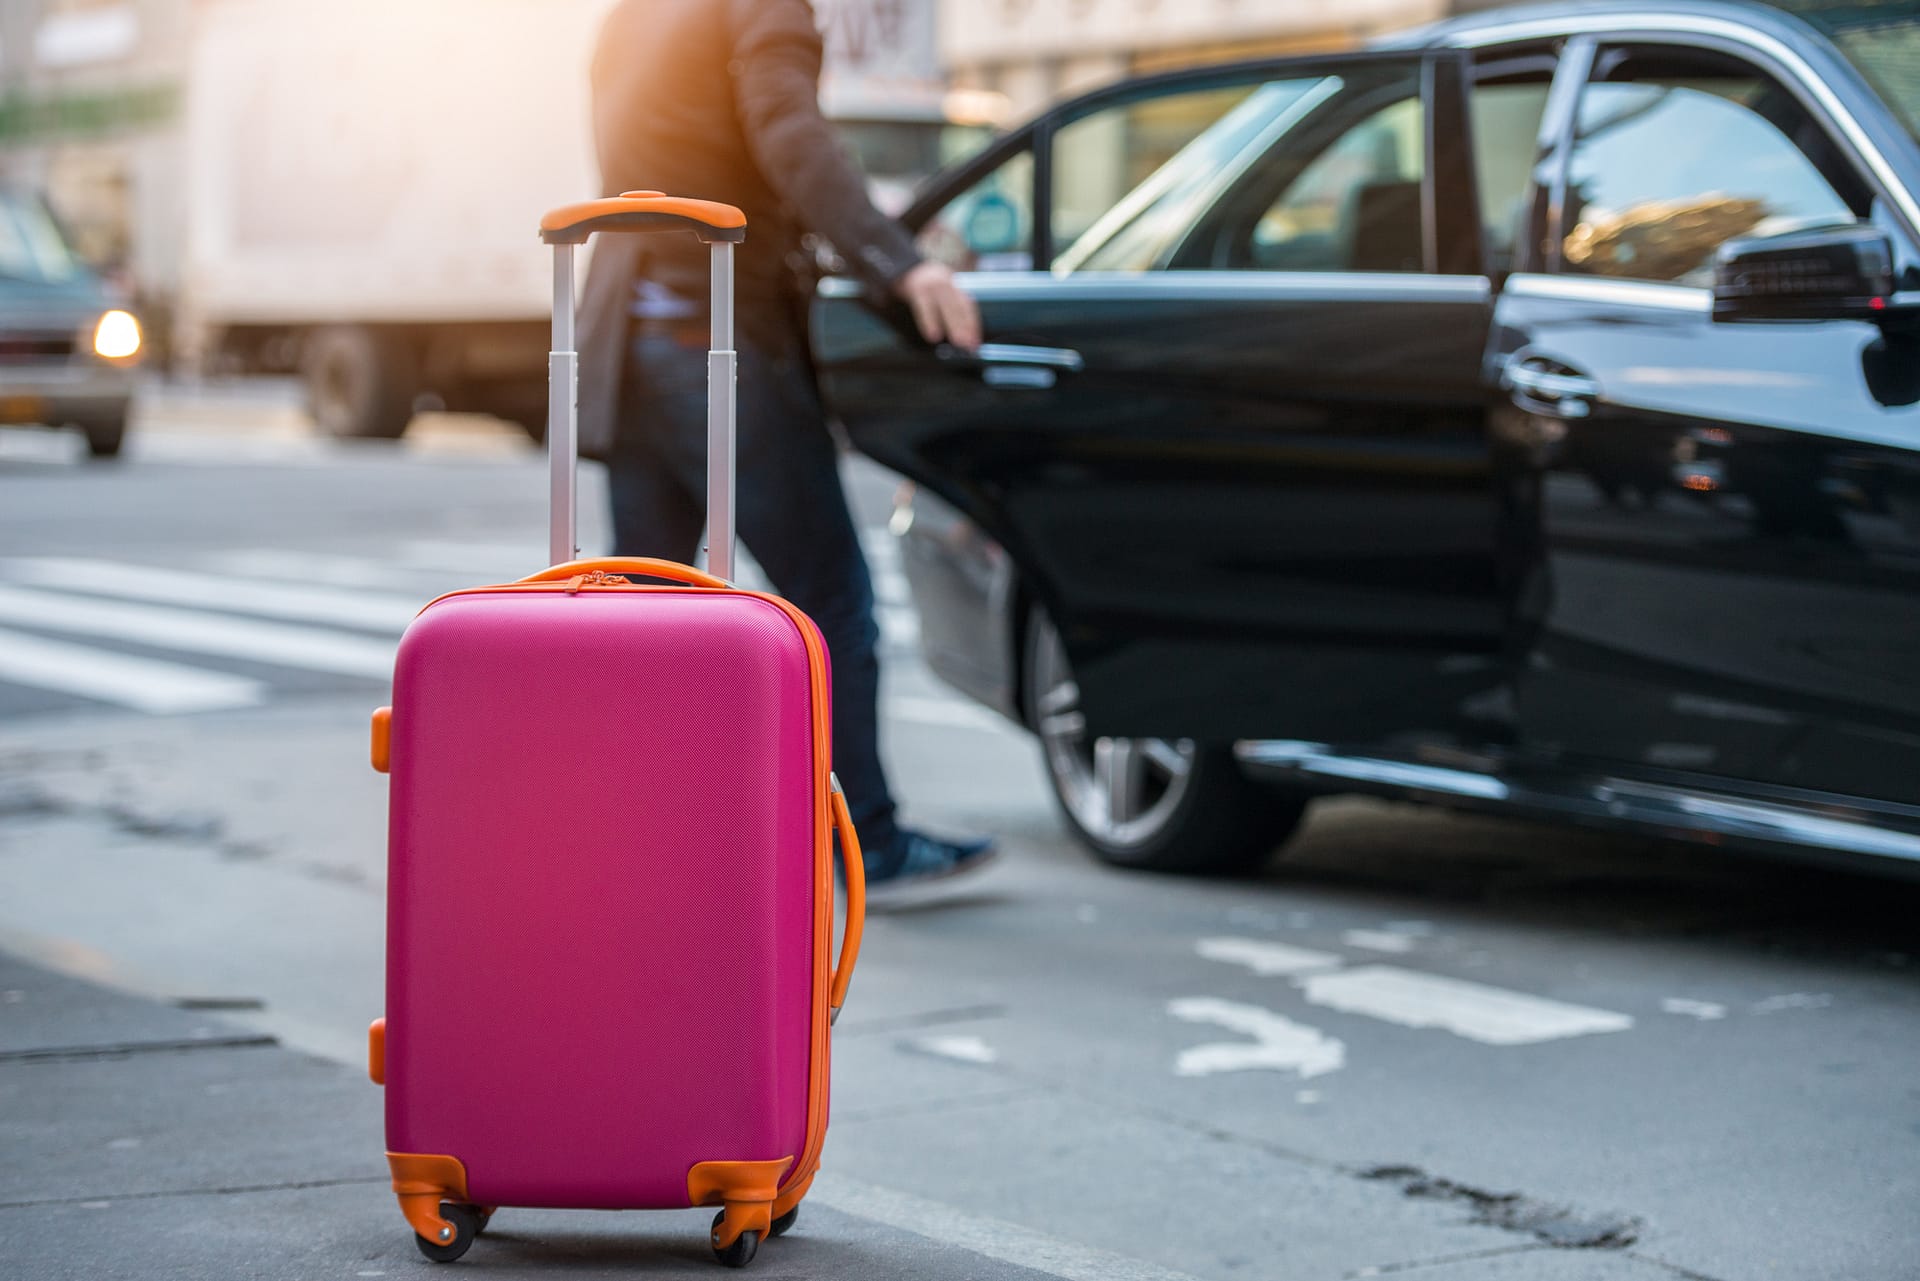 What to Look for in a Great Airport Car Service - FindABusinessThat.com